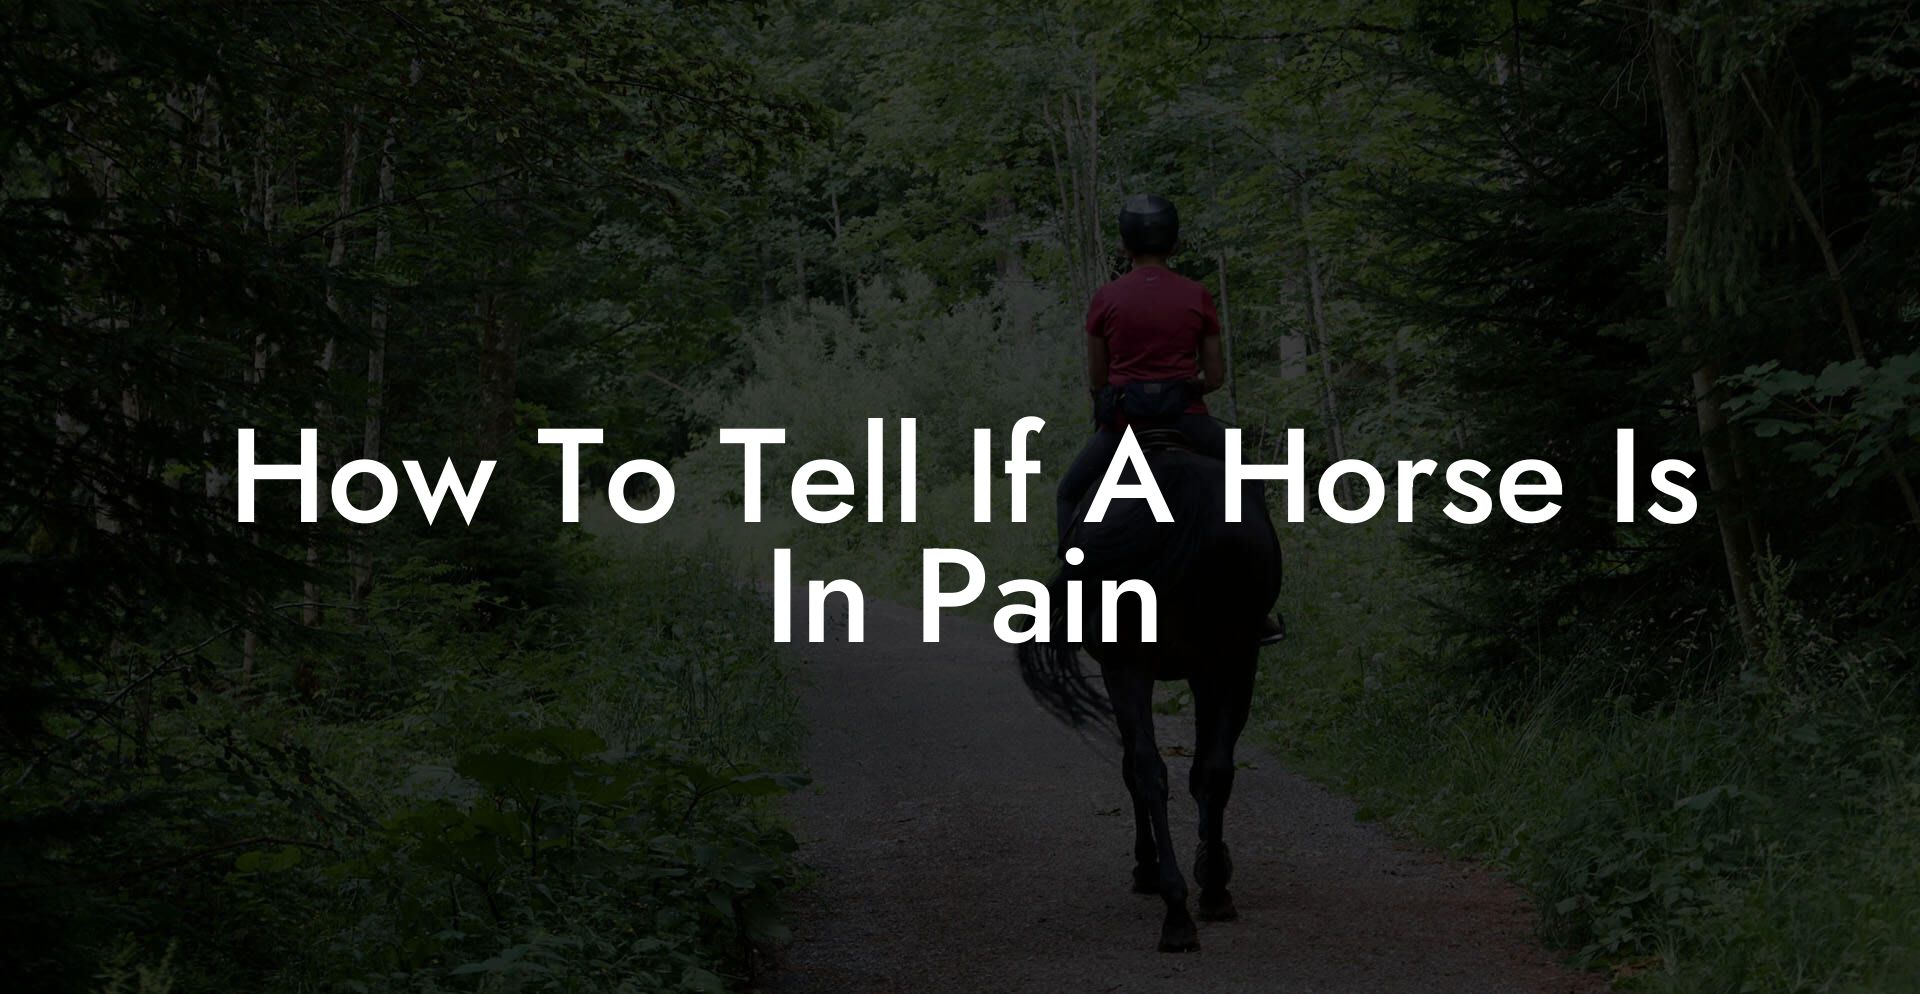 How To Tell If A Horse Is In Pain